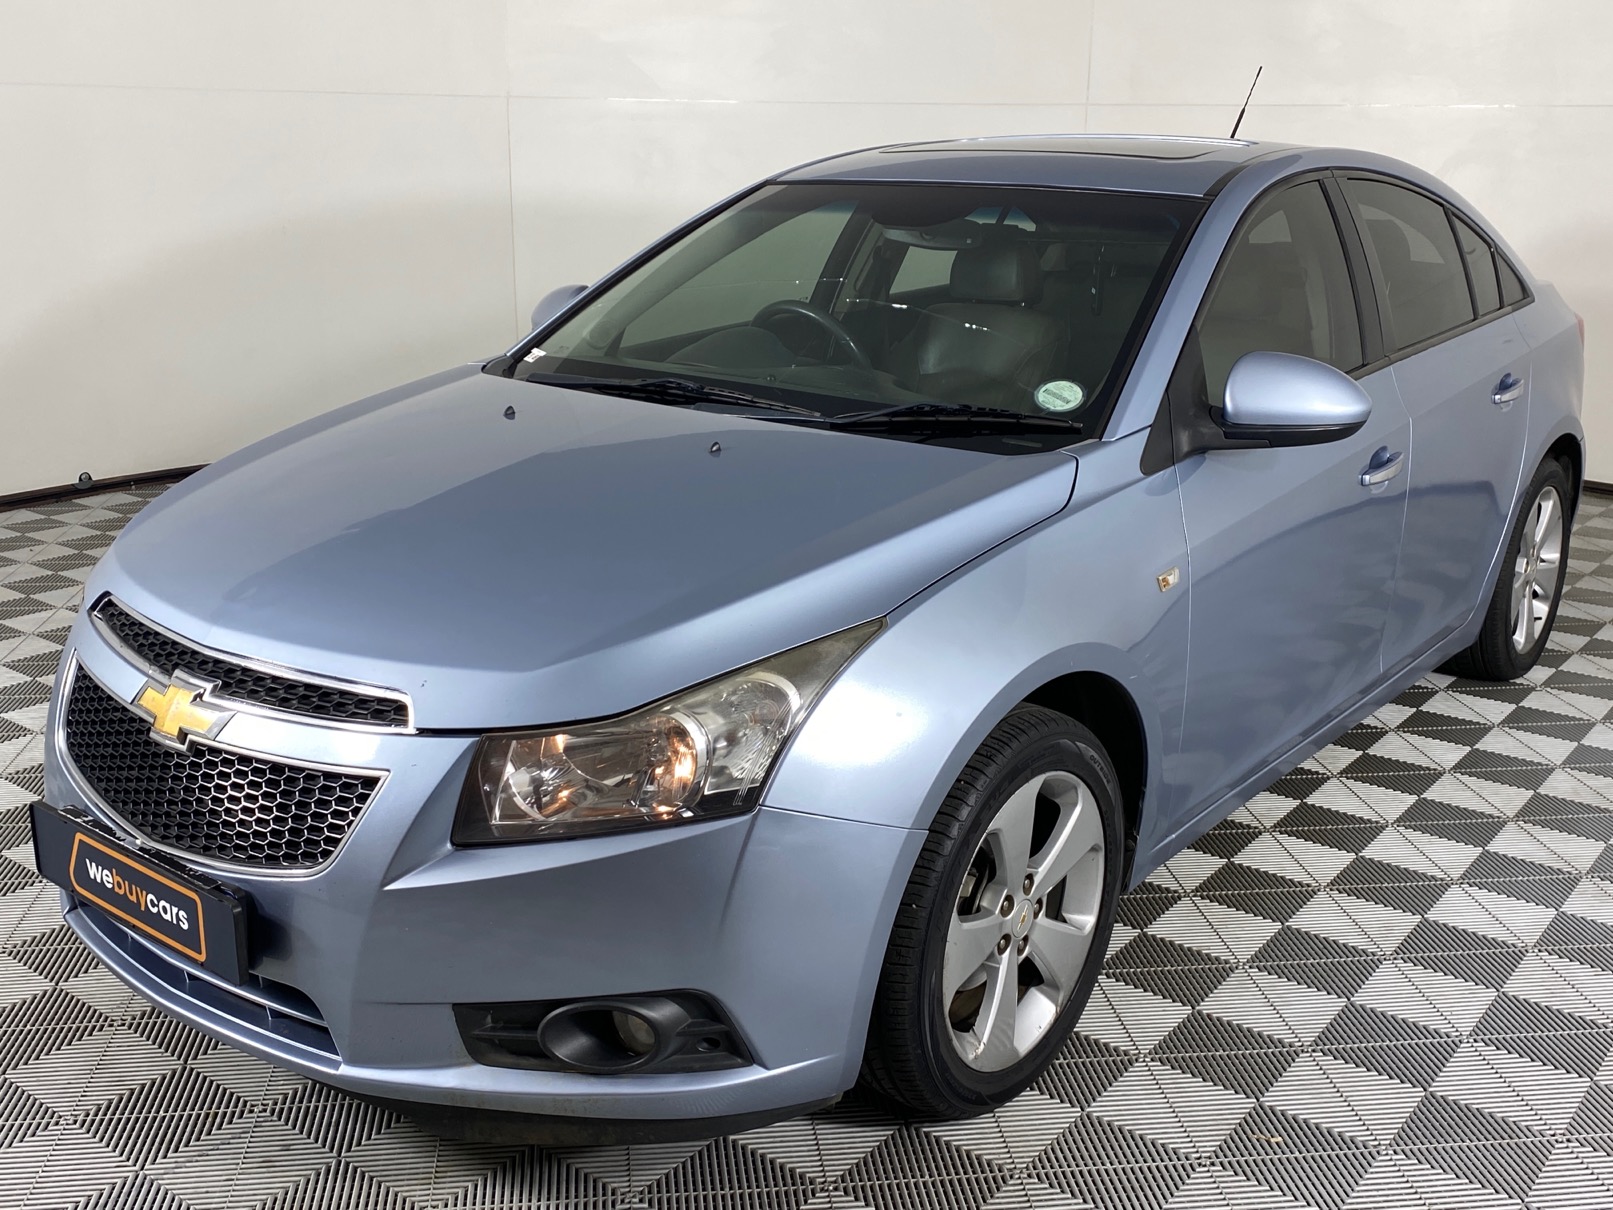 Used 2010 Chevrolet Cruze 1.6 L for sale | WeBuyCars